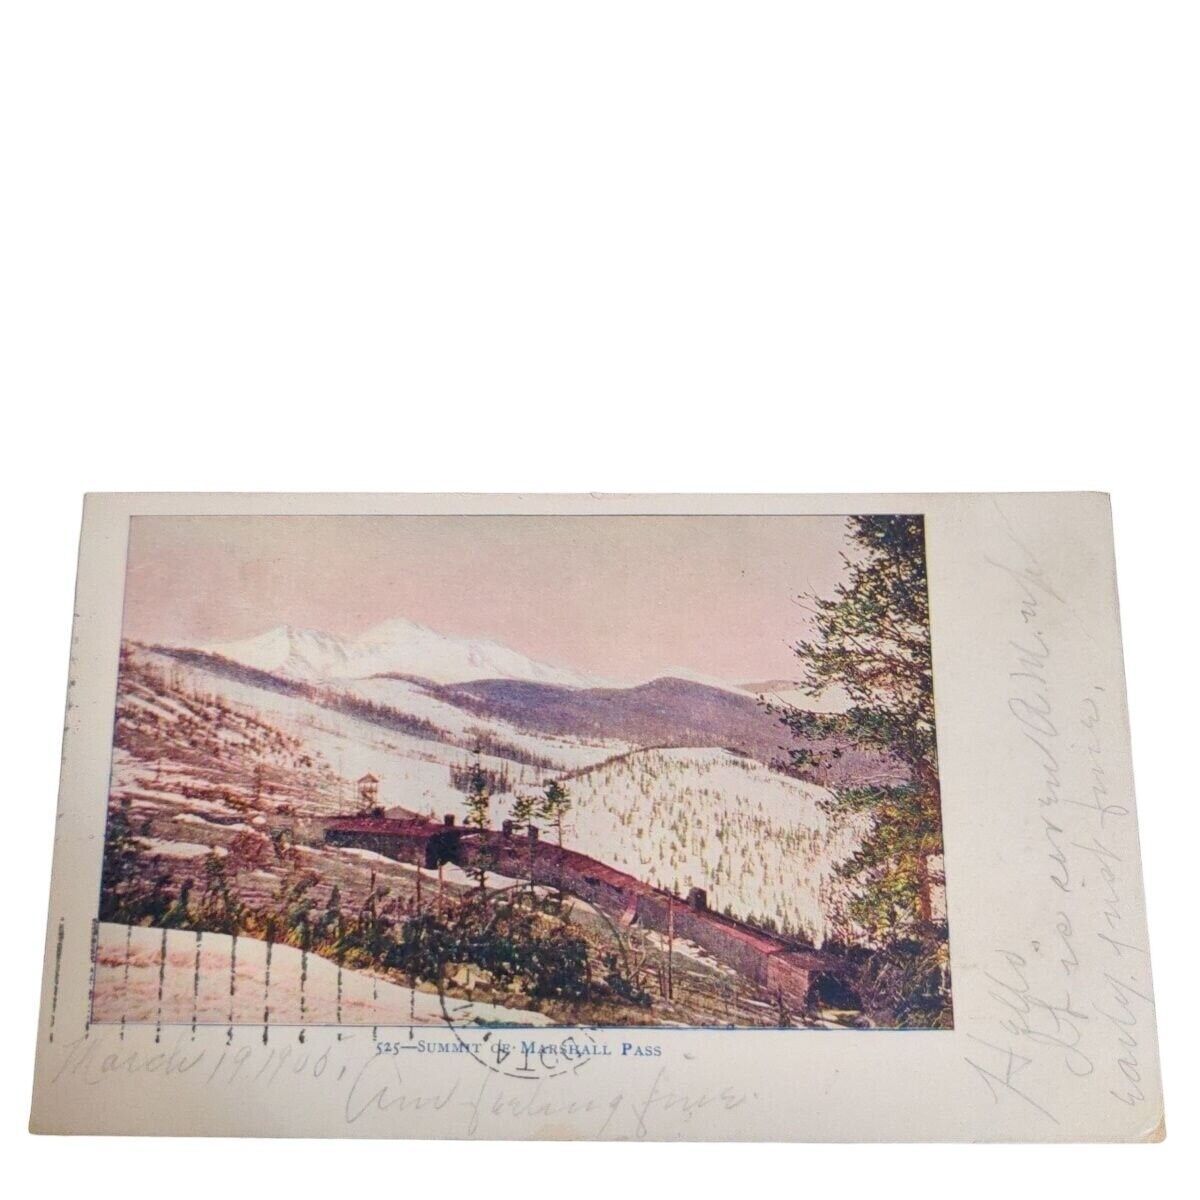 Primary image for Postcard Summit Of Marshall Pass Mountain Pass Colorado Vintage Posted